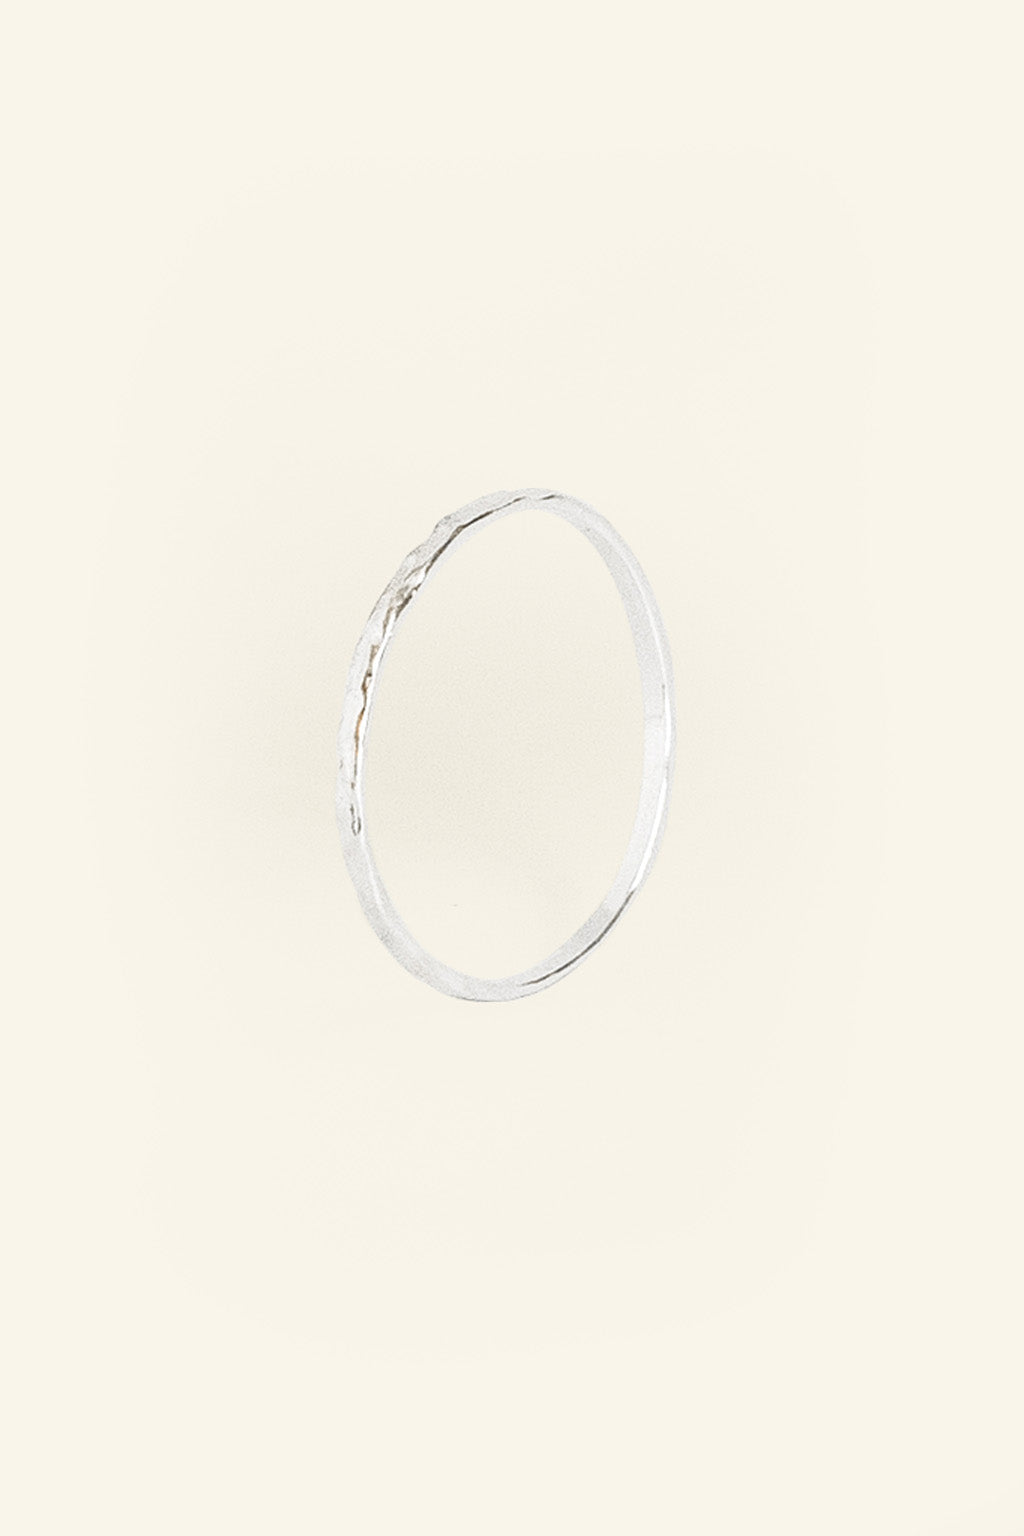 Dainty knuckle ring